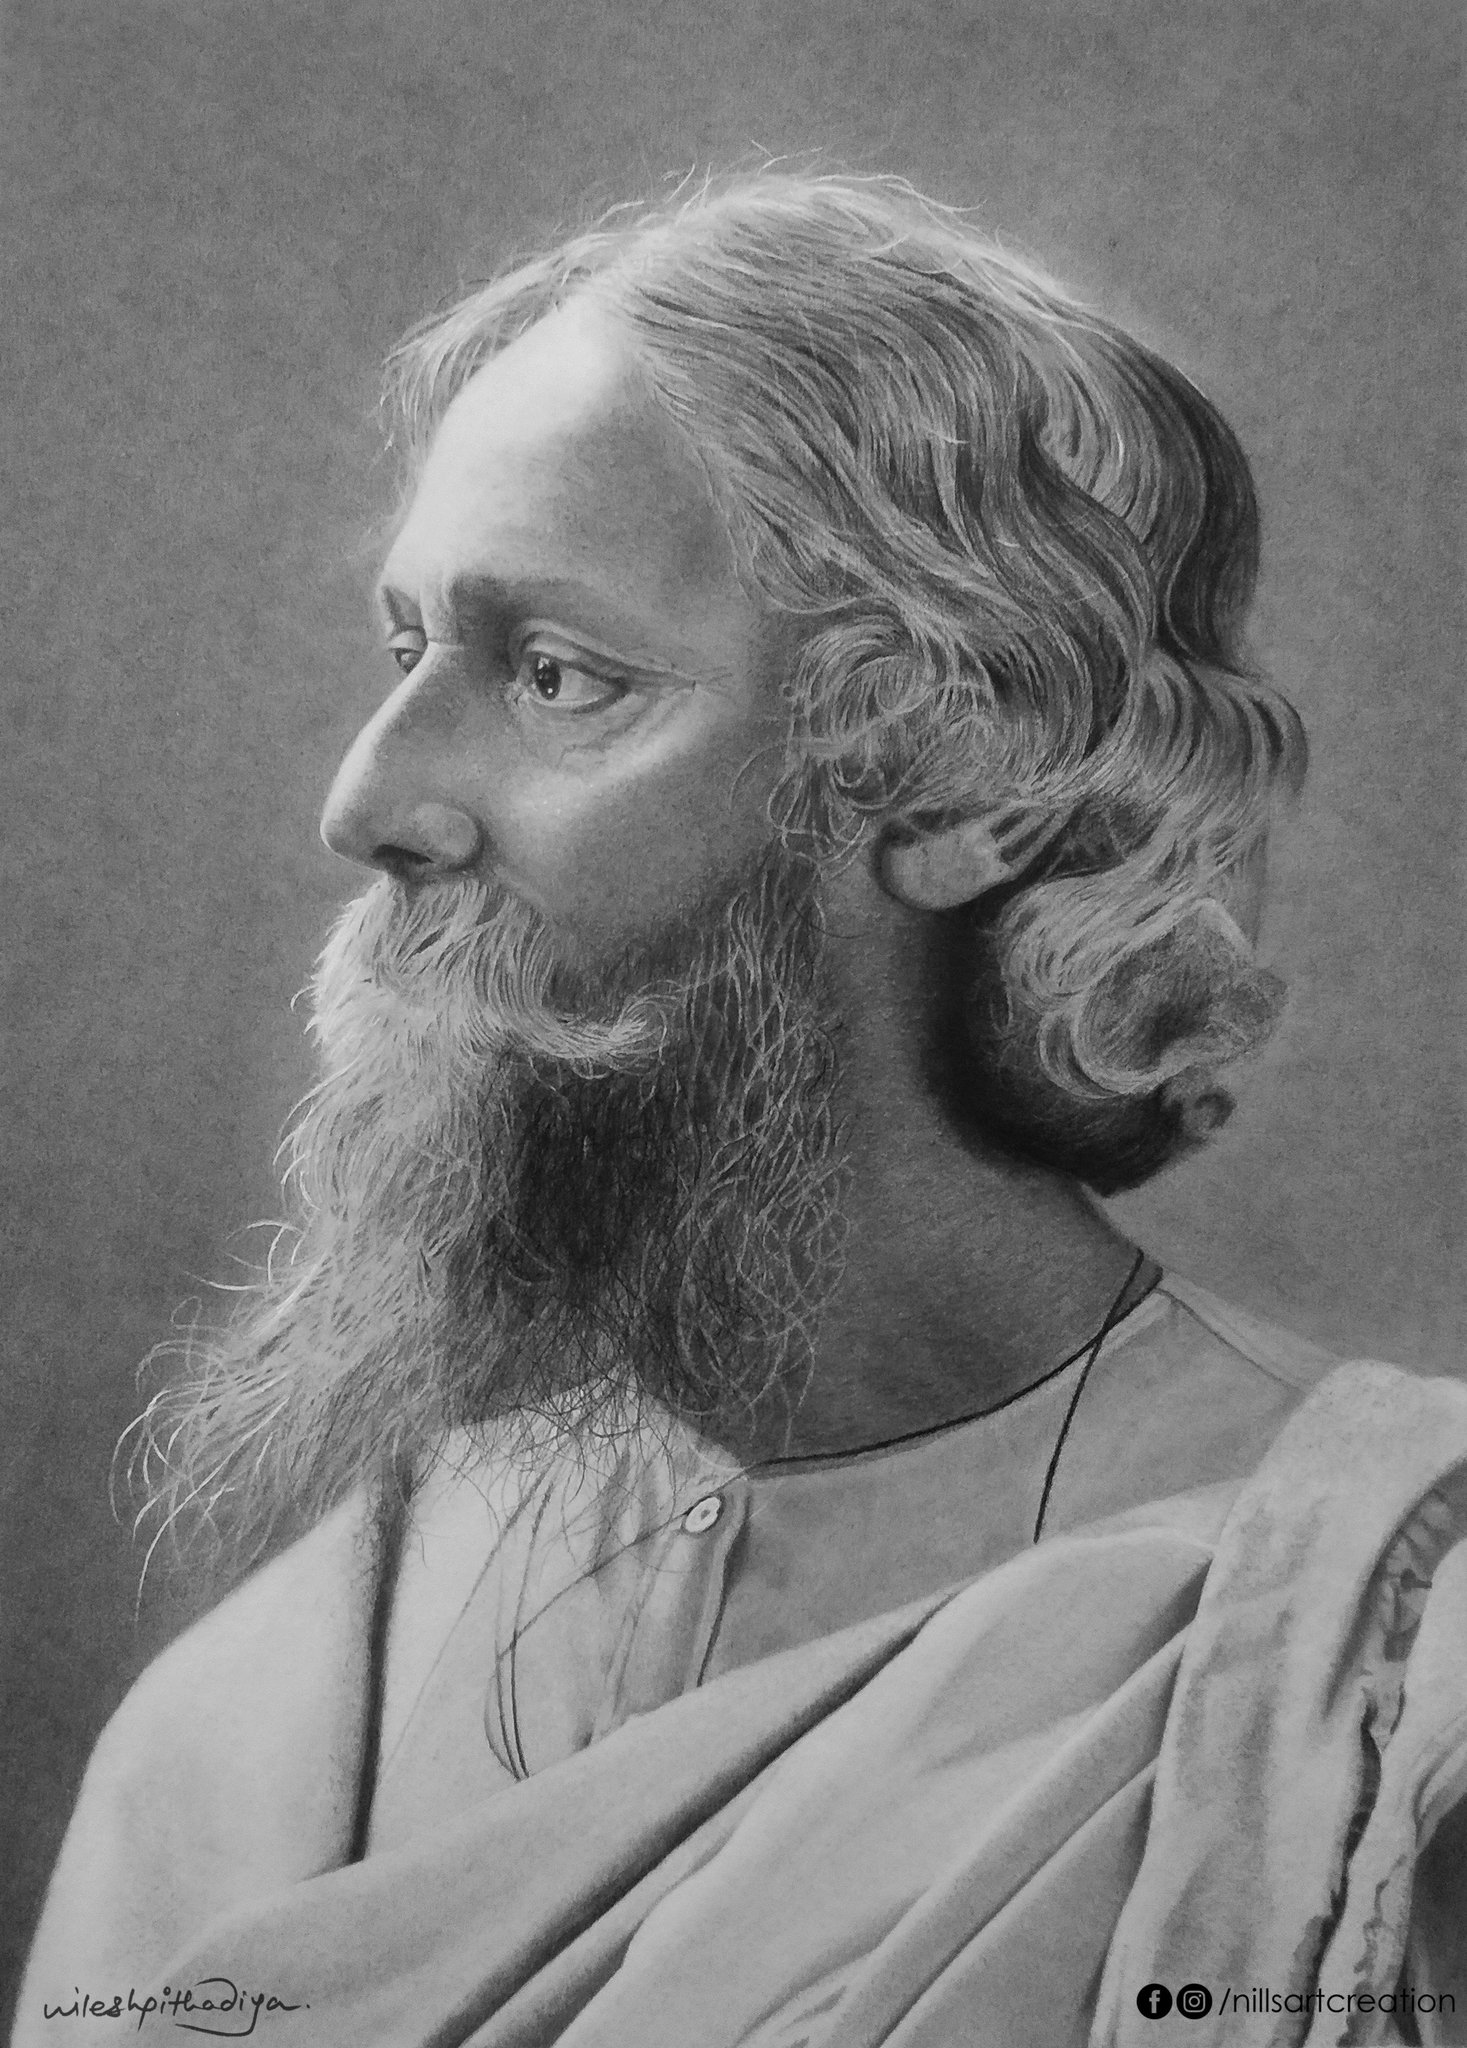 Share 196+ sketch on rabindranath tagore latest